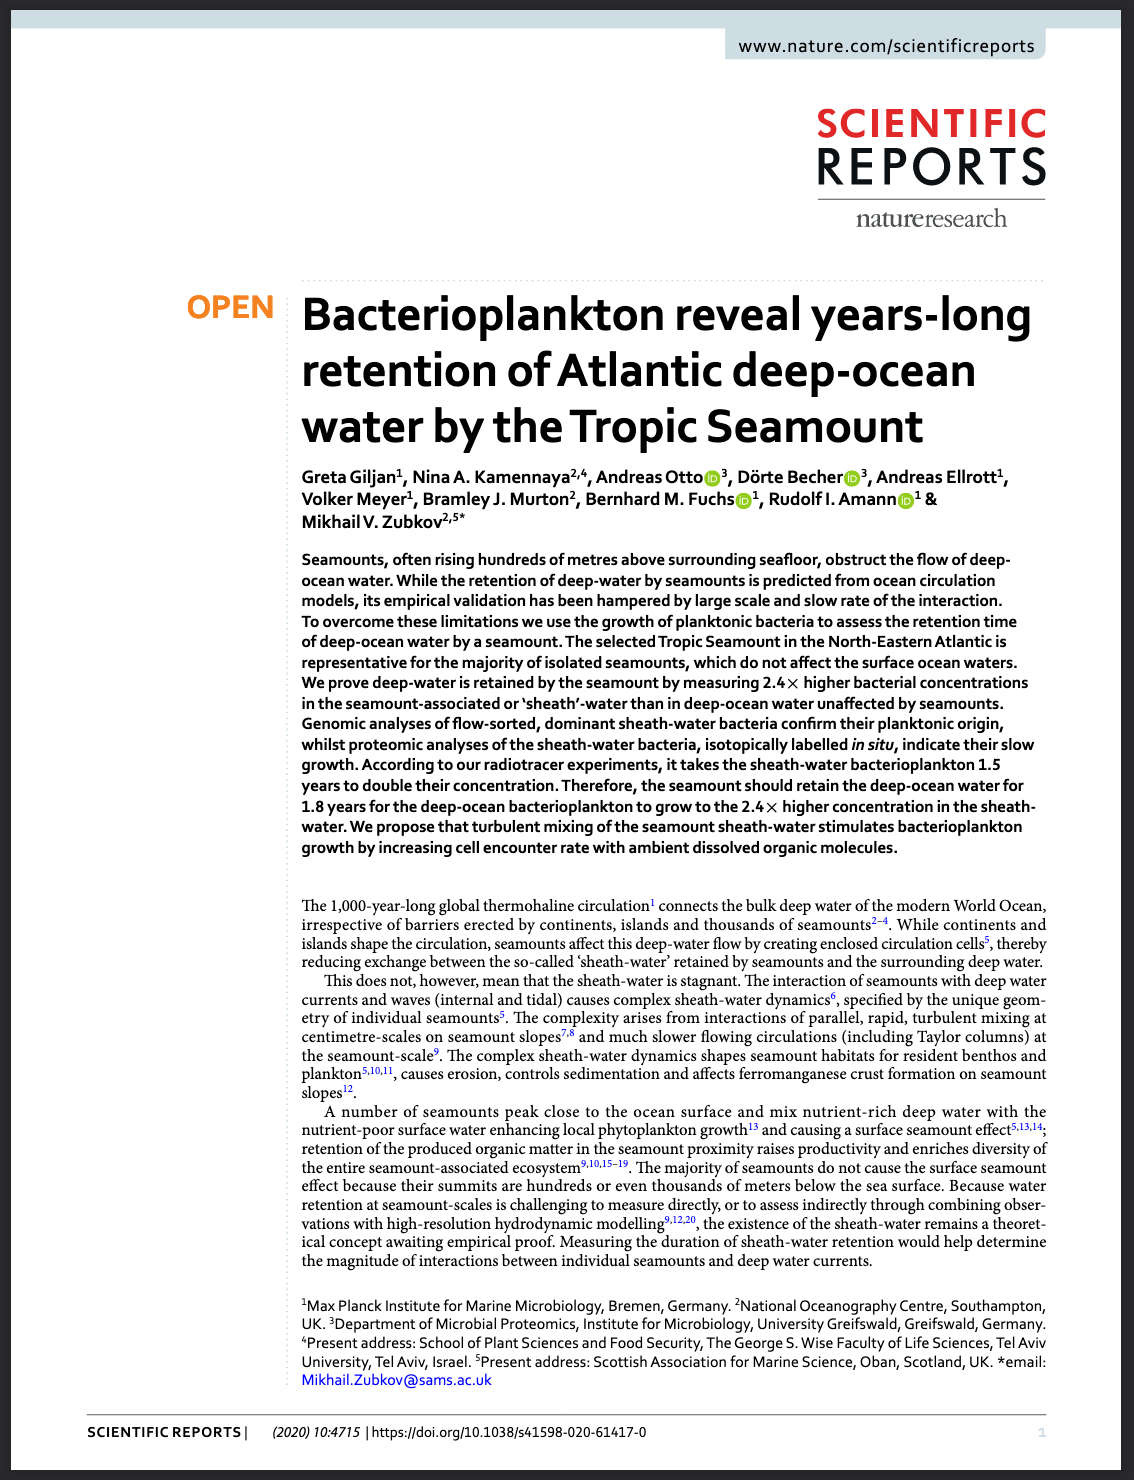 Paper aus Scientific Reports: Bacterioplankton reveal years-long retention of Atlantic deep-ocean water by the Tropic Seamount